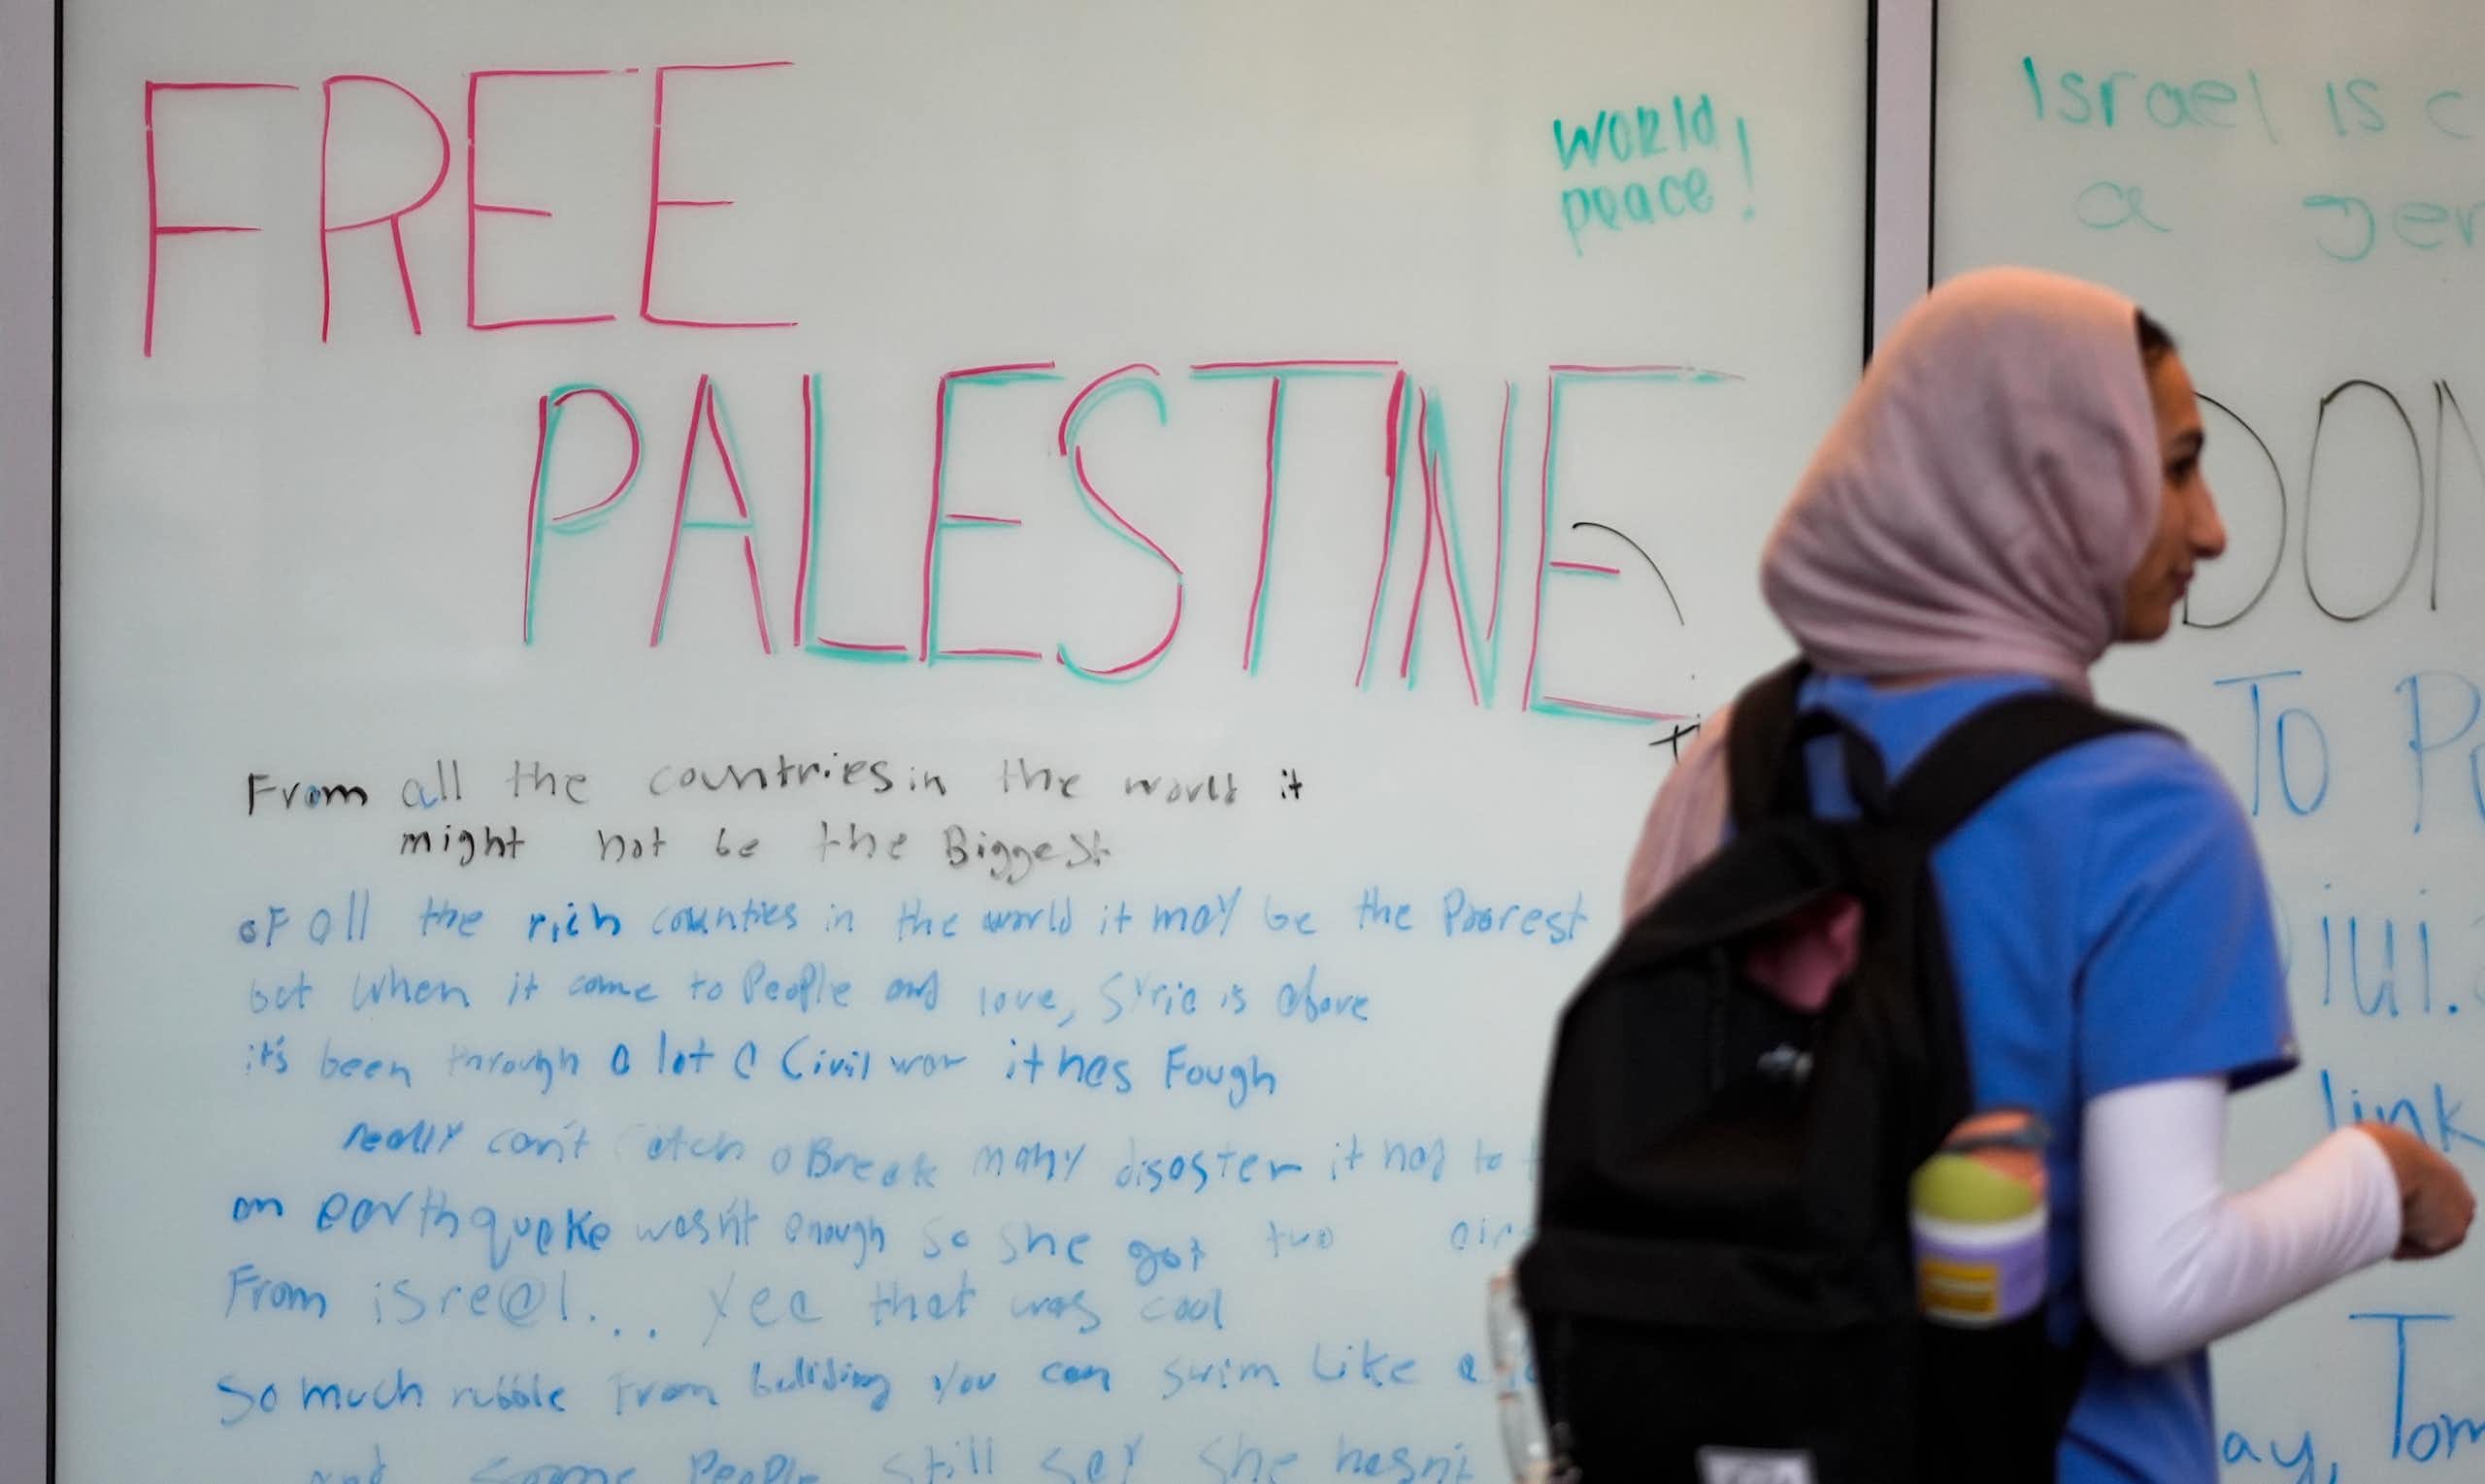 The words 'world peace' and 'free Palestine' seen on a white board as a woman in hijab and knapsack walks past.